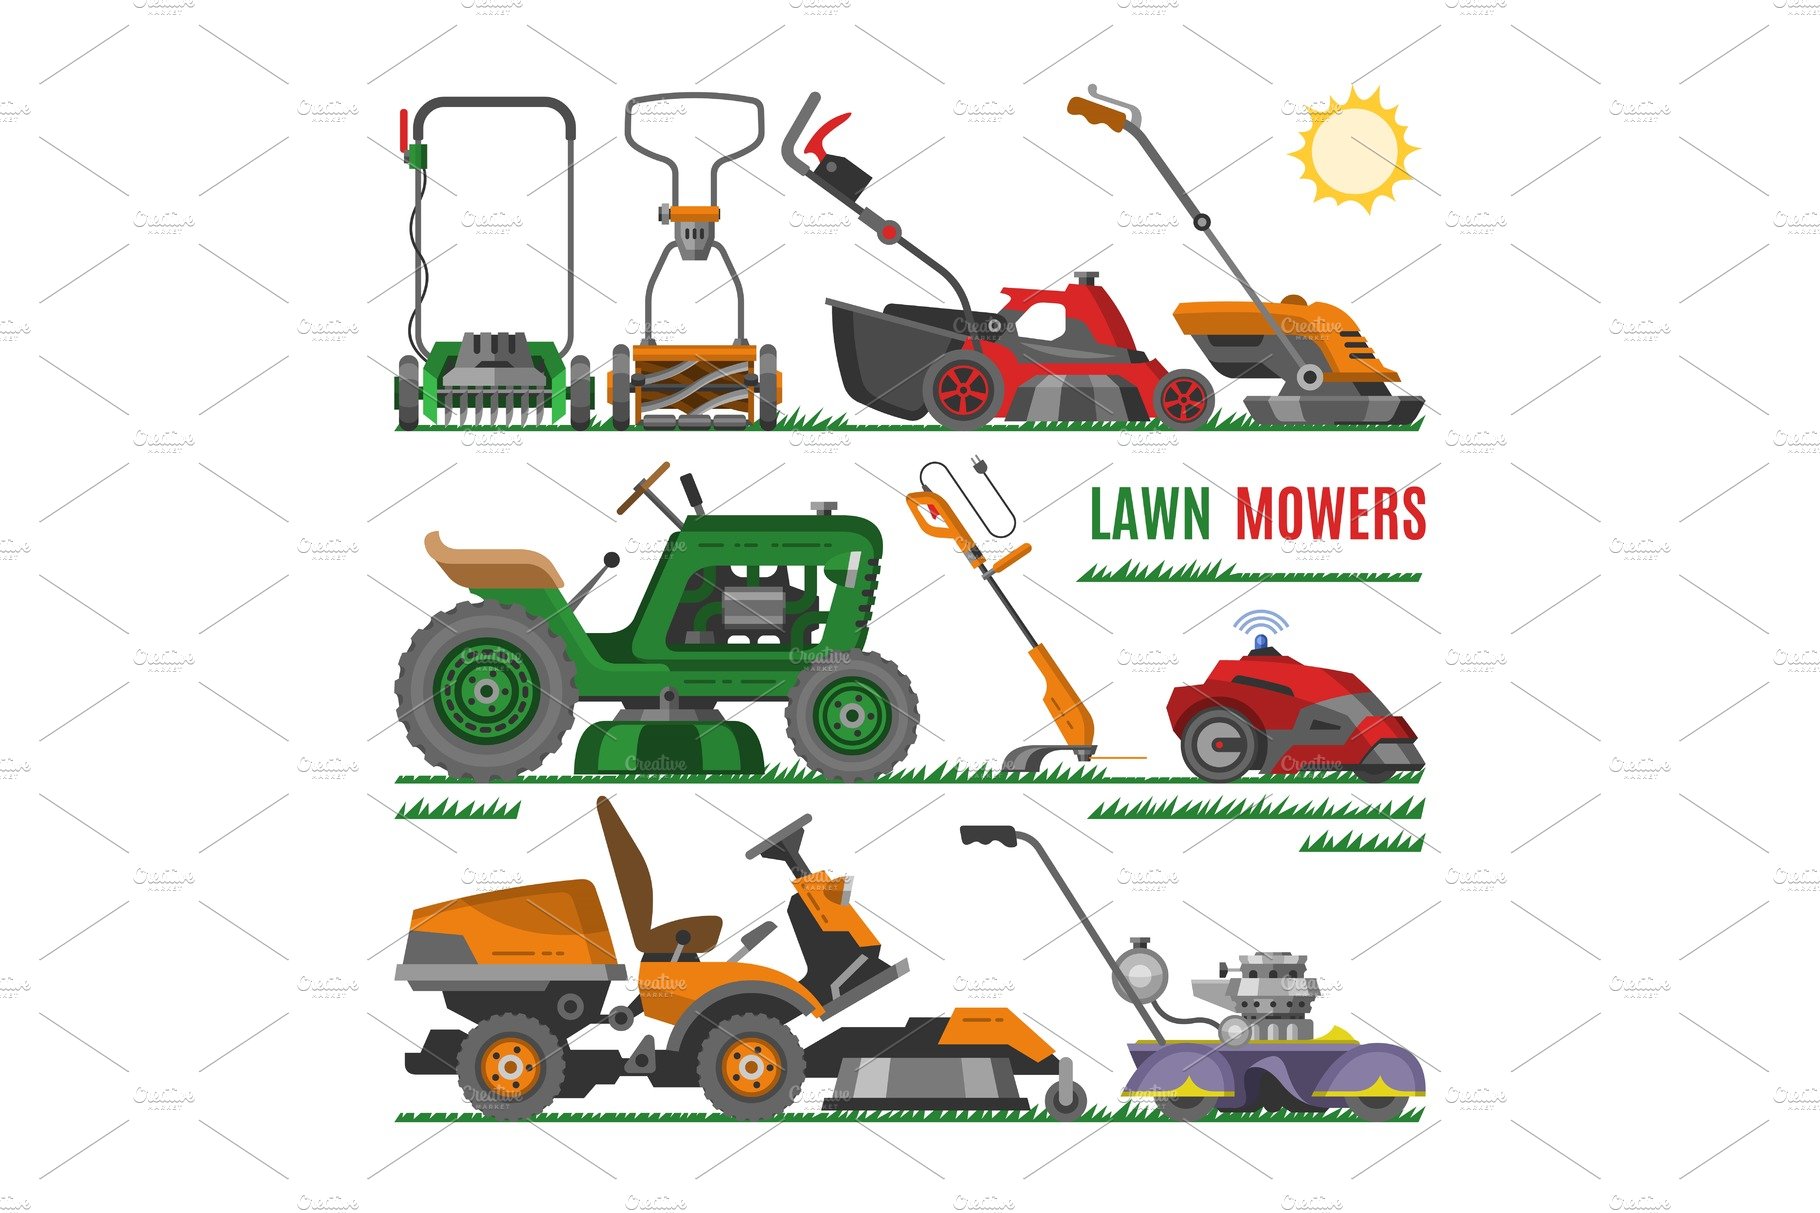 Lawn mower vector gardening cover image.